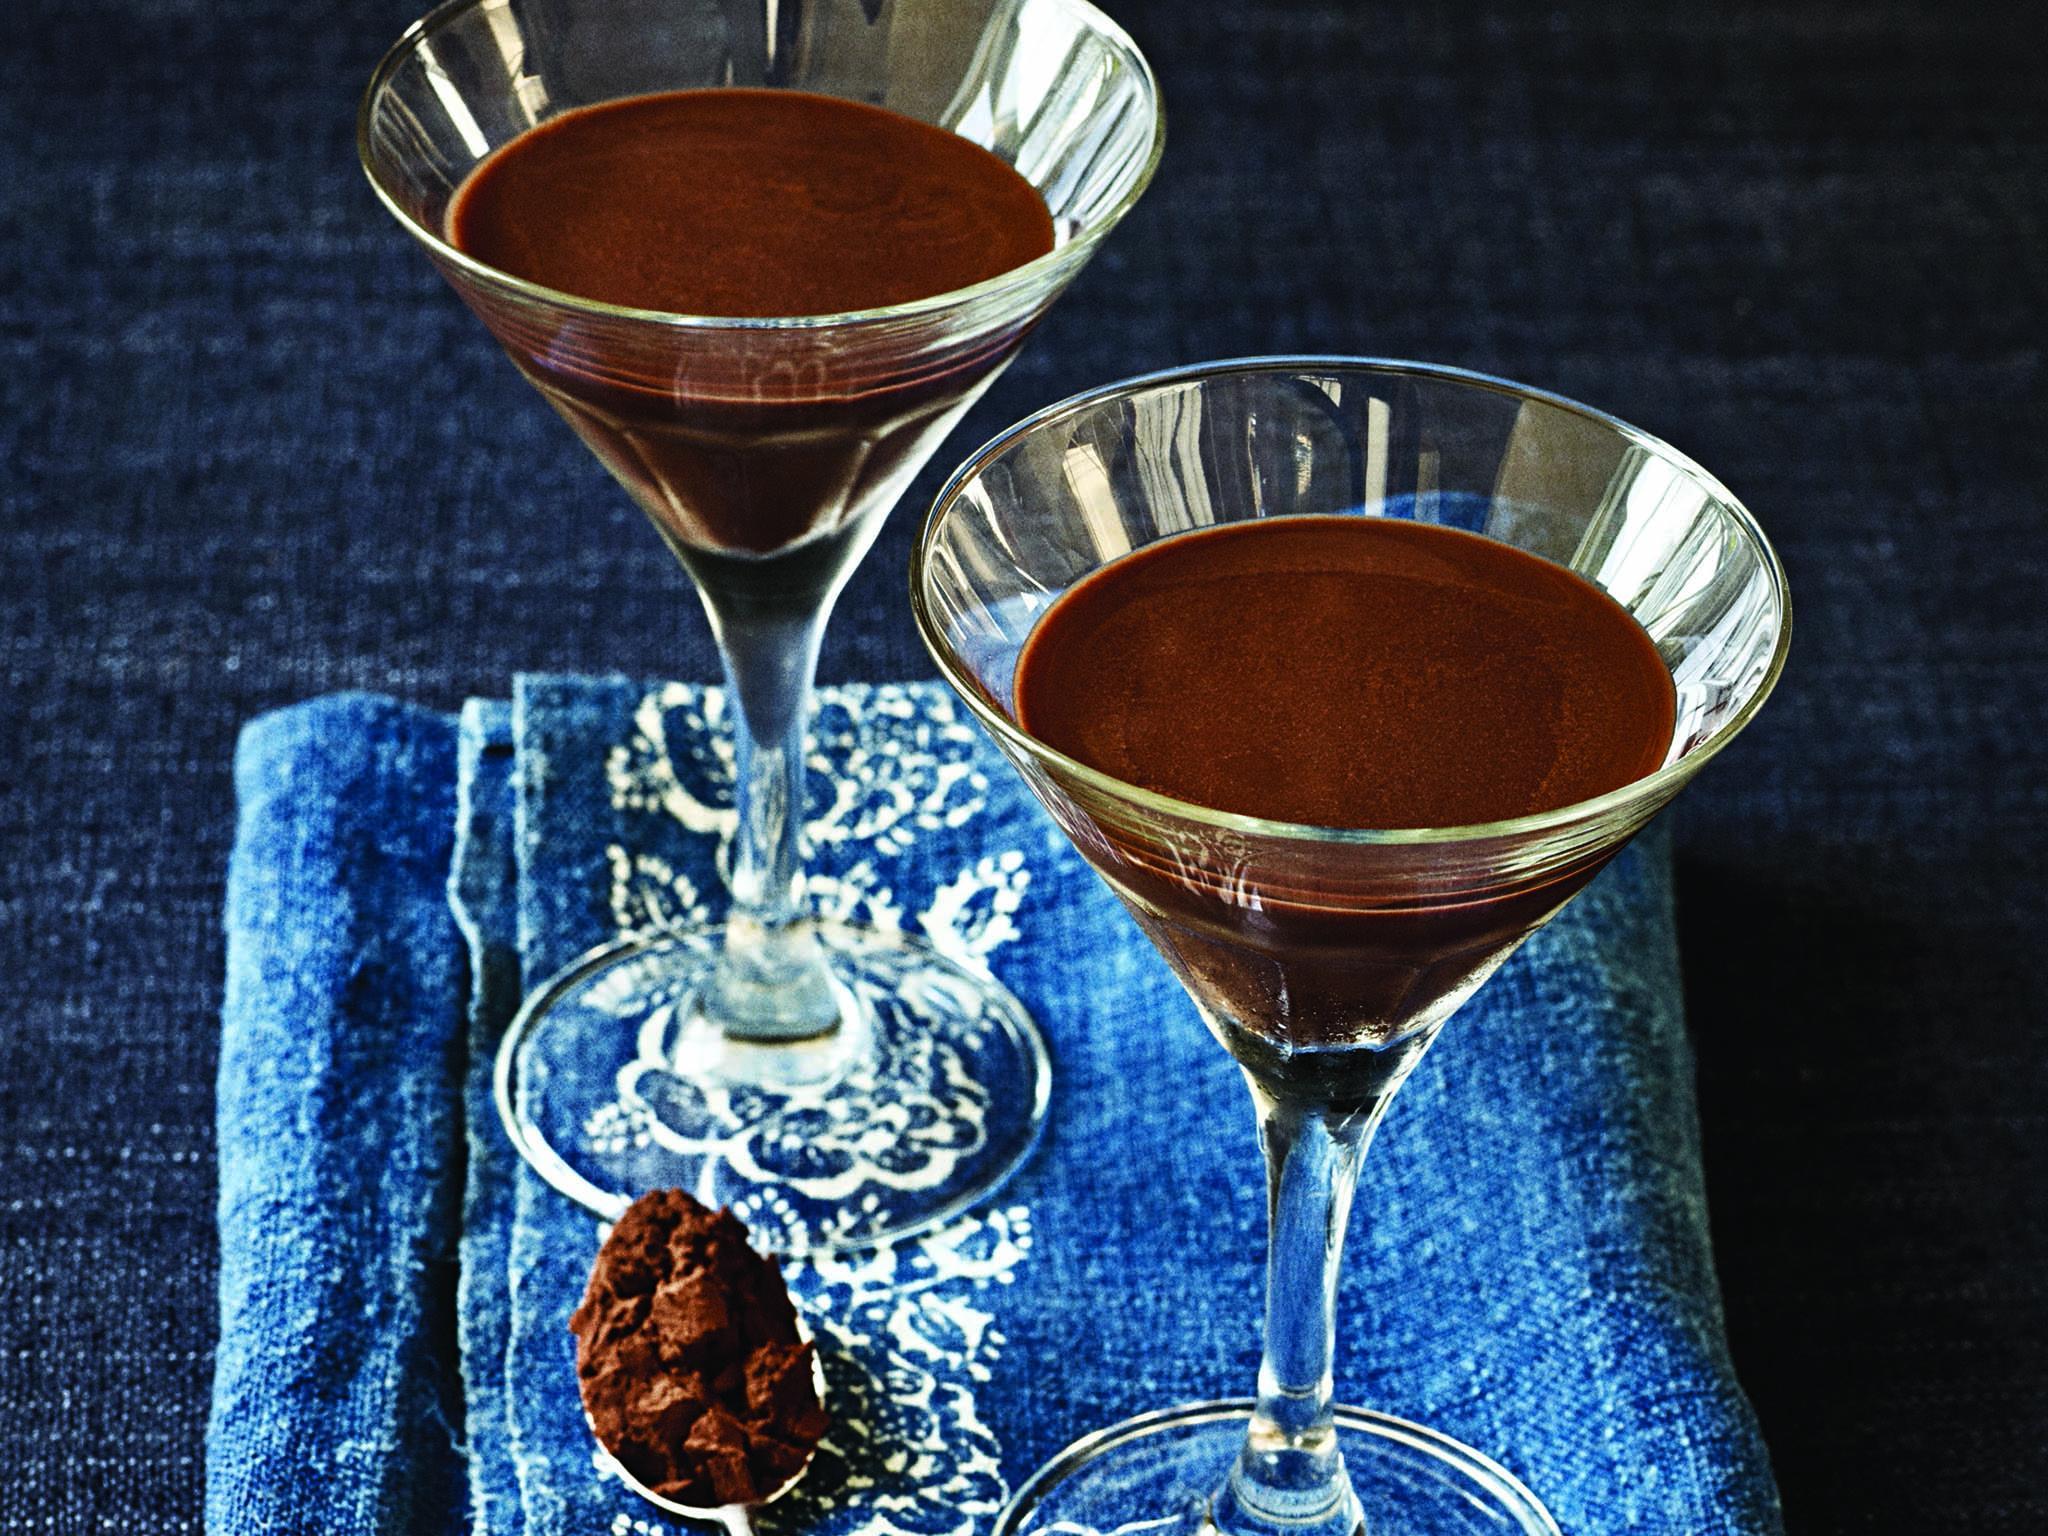 The genuine article: Paul A Young says only real chocolate makes the best chocolate martini